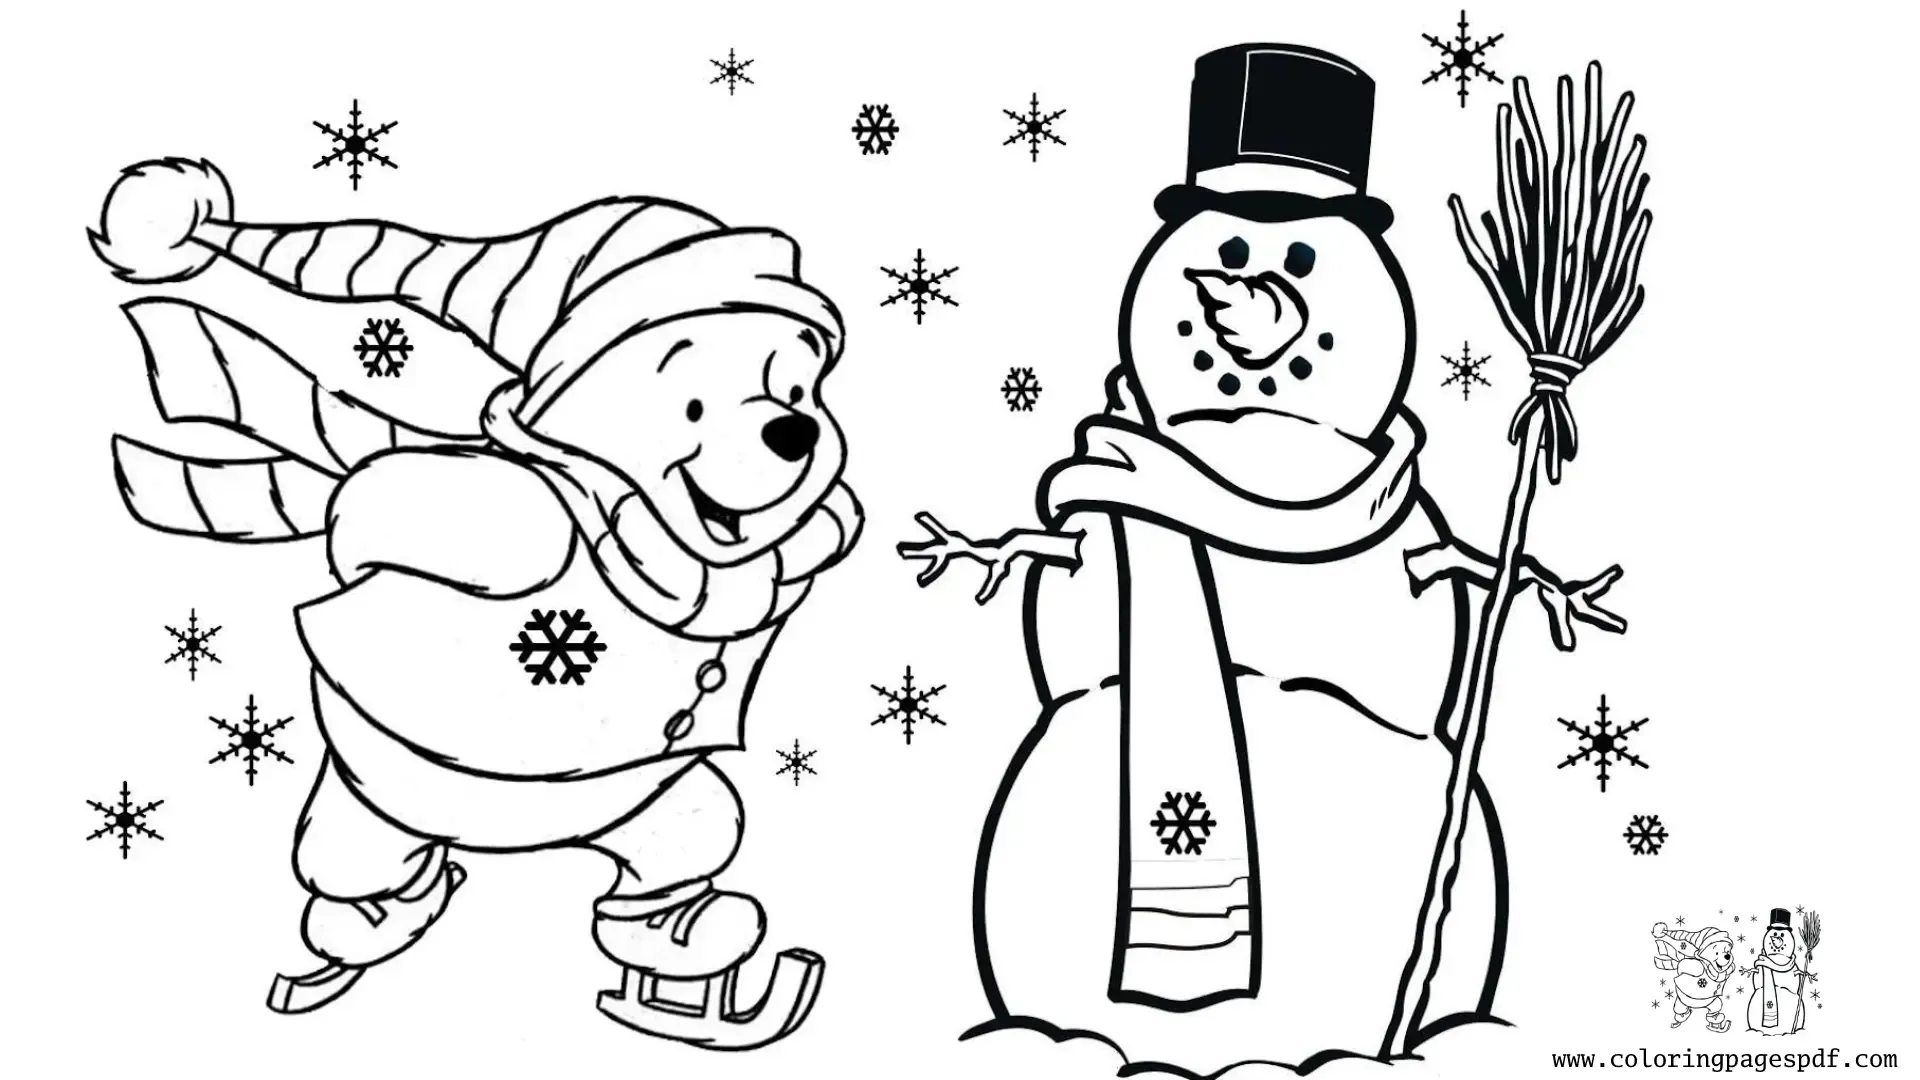 Coloring Page Of Winnie The Pooh Enjoying Christmas